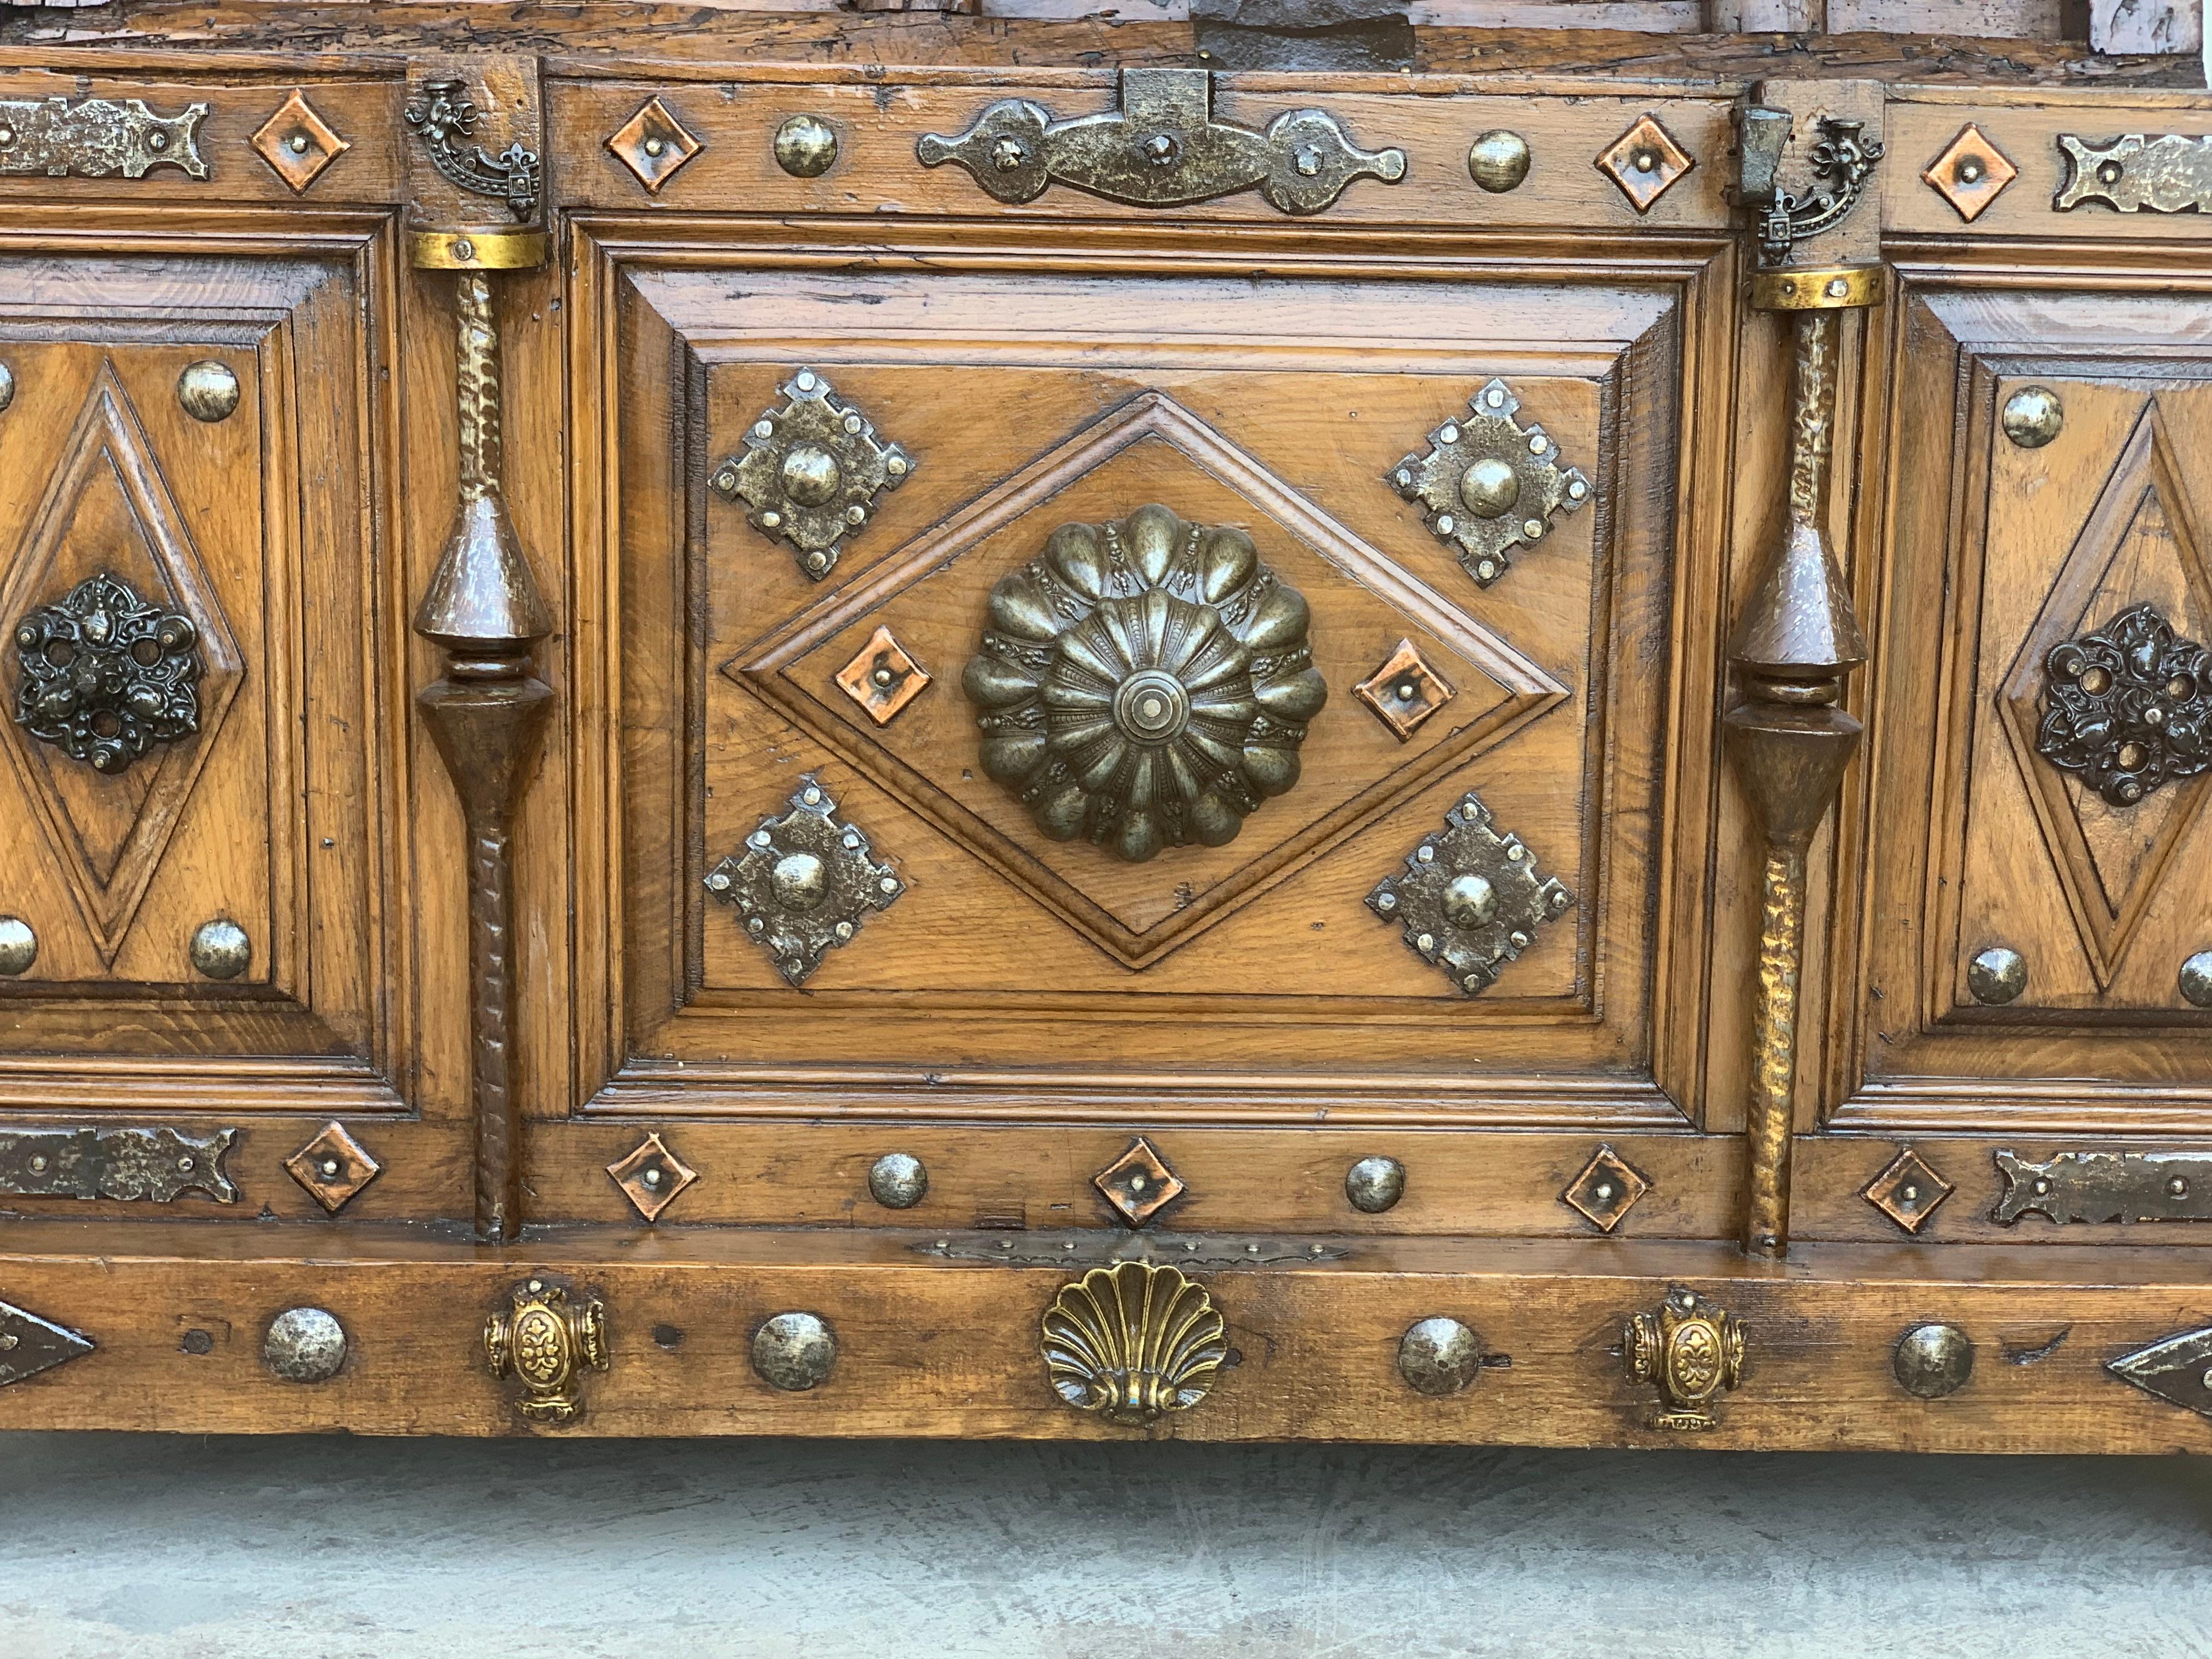 19th Century Spanish Walnut Trunk with Bronze Mounts and Decorative Nails 1